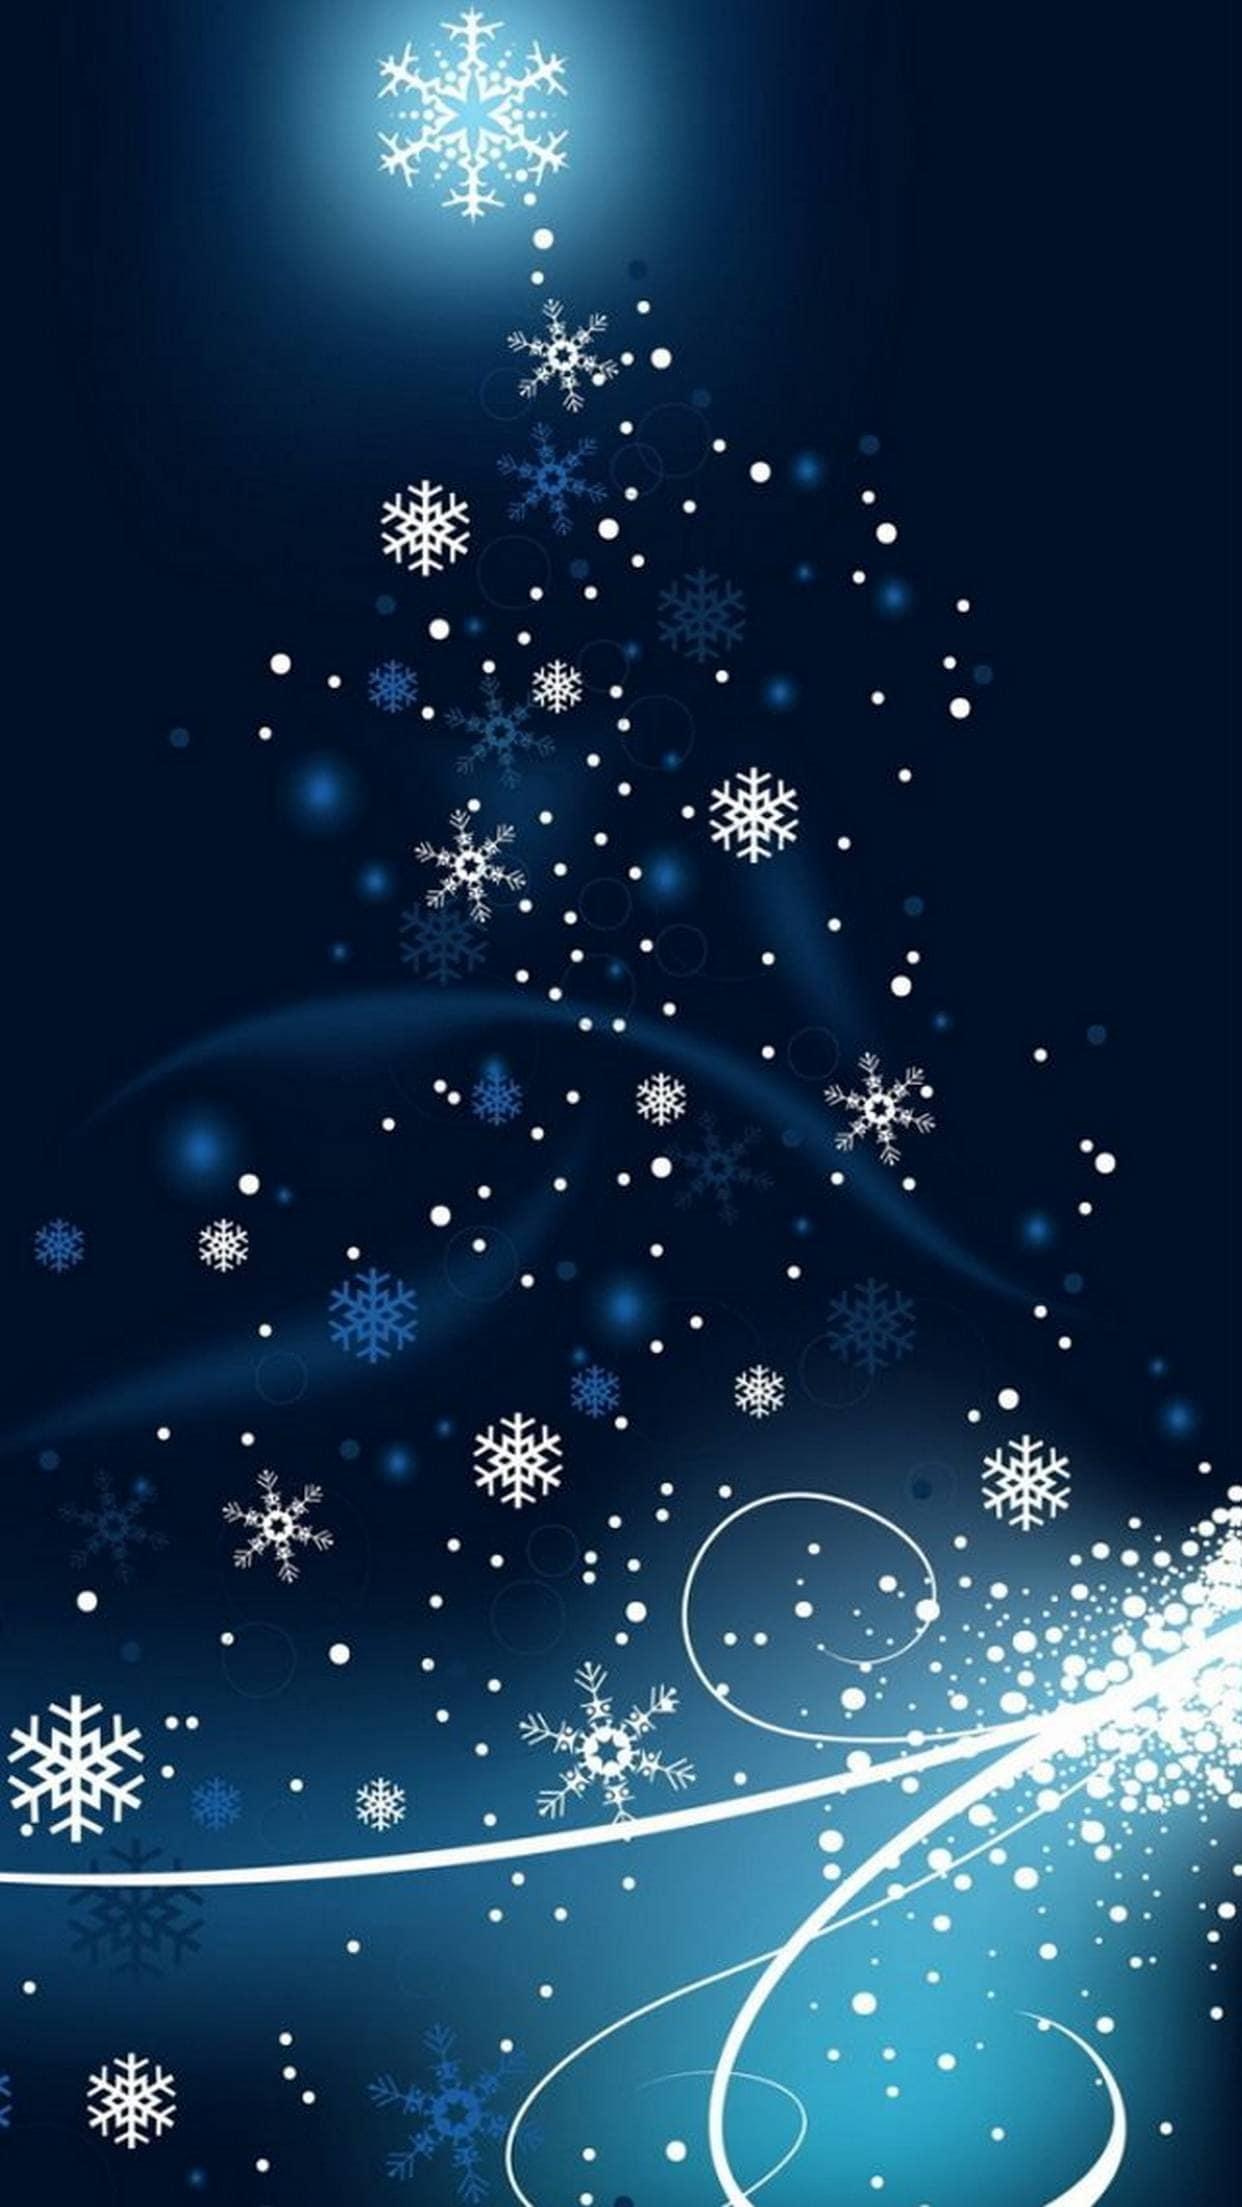 Try To Use Christmas Wallpaper For iPhones